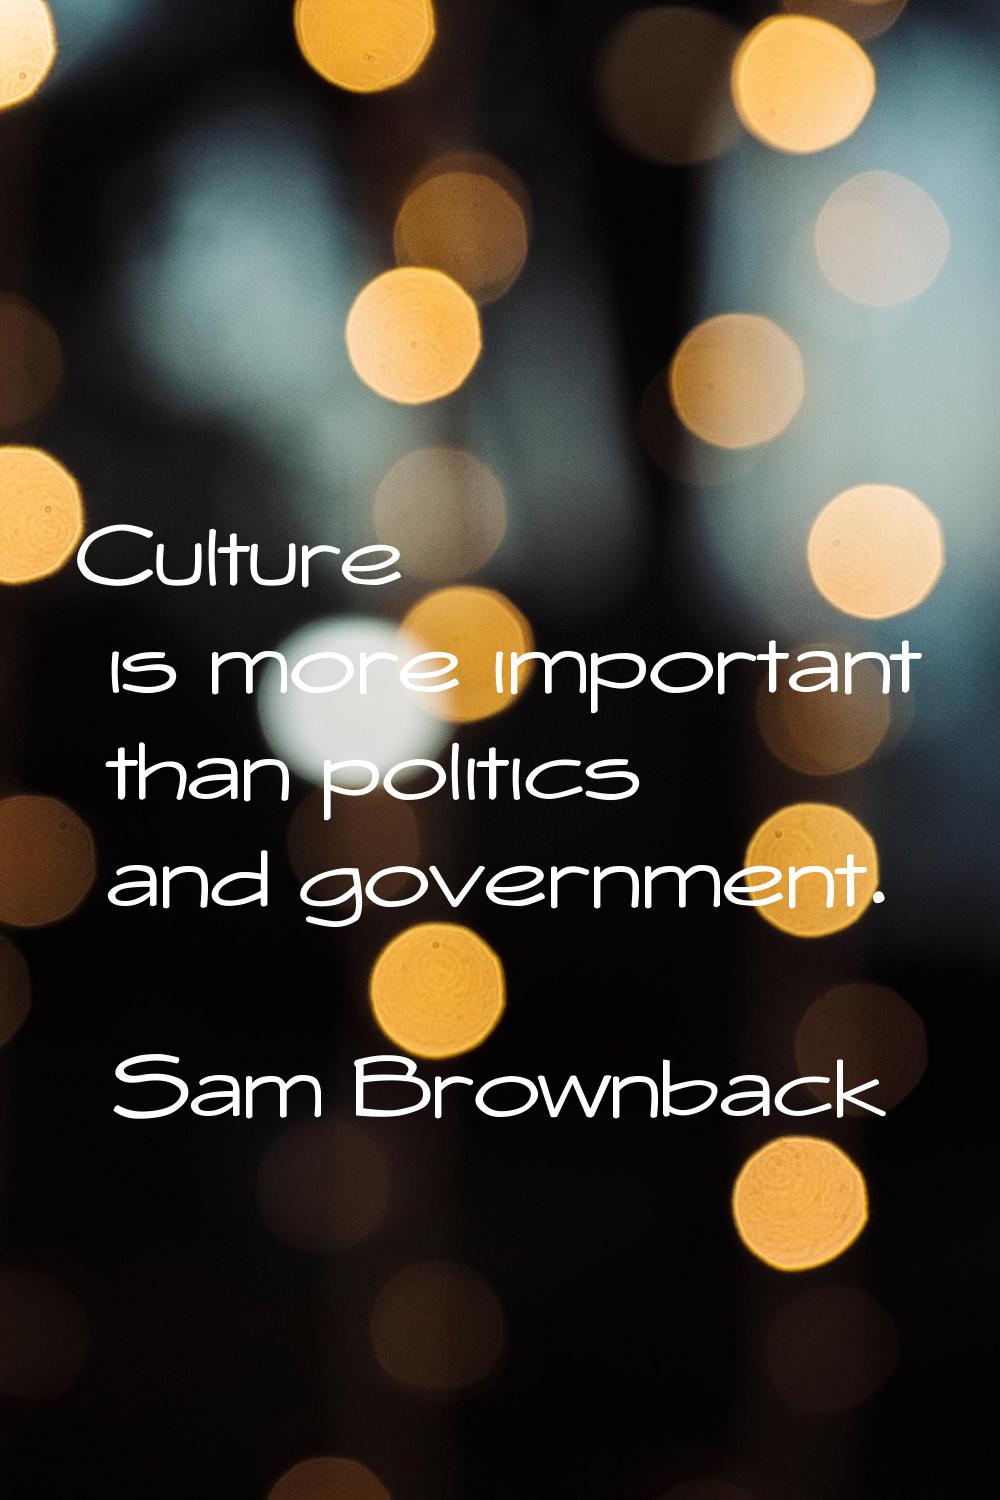 Culture is more important than politics and government.